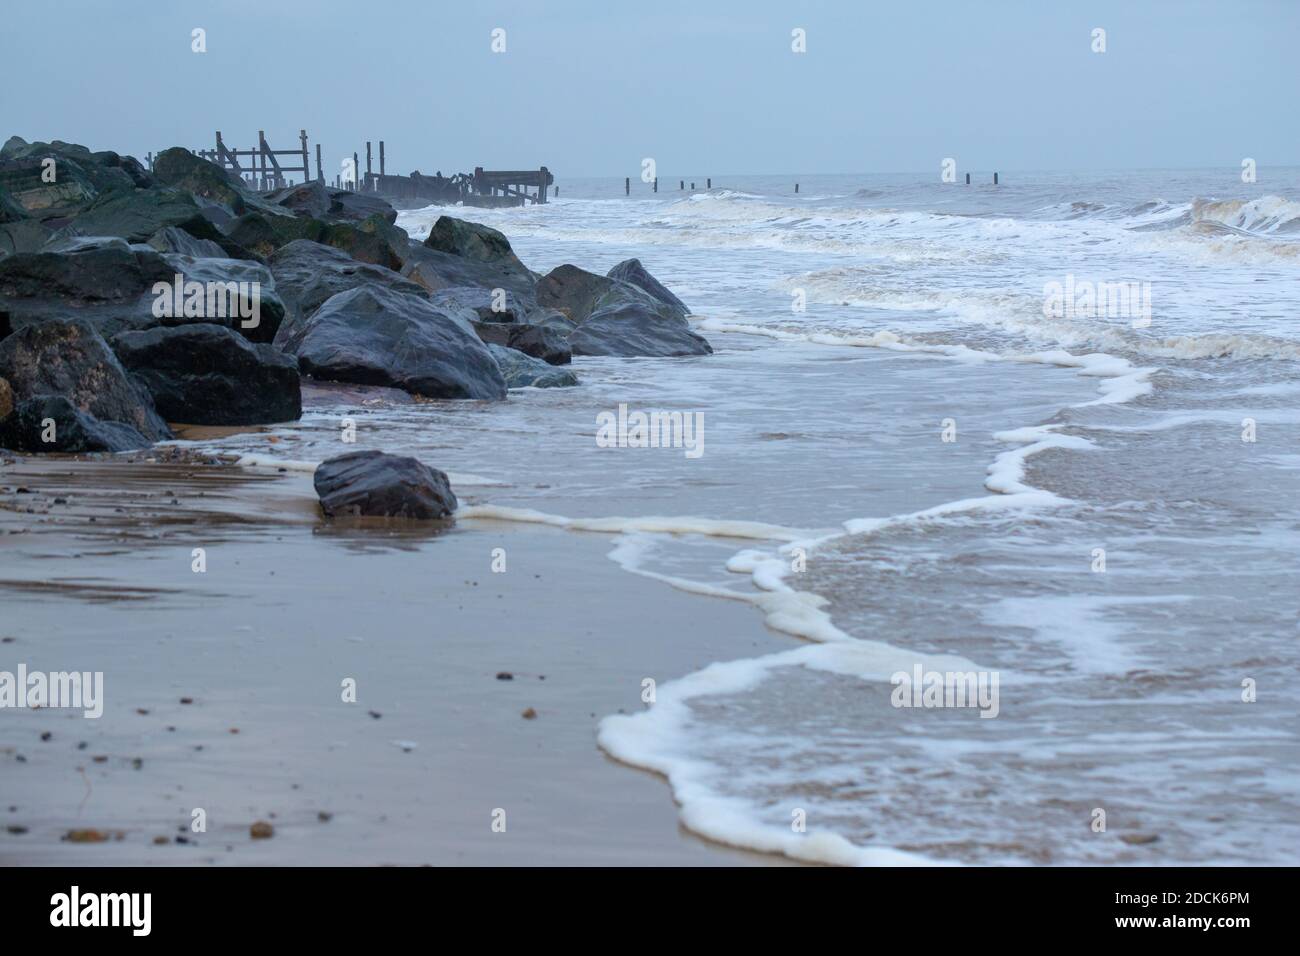 Happisburgh beach, Norfolk. Coastal cliff erosion by the North Sea. Sea defences of imported Norway rocks left foreground, attempt at replacing old ti Stock Photo